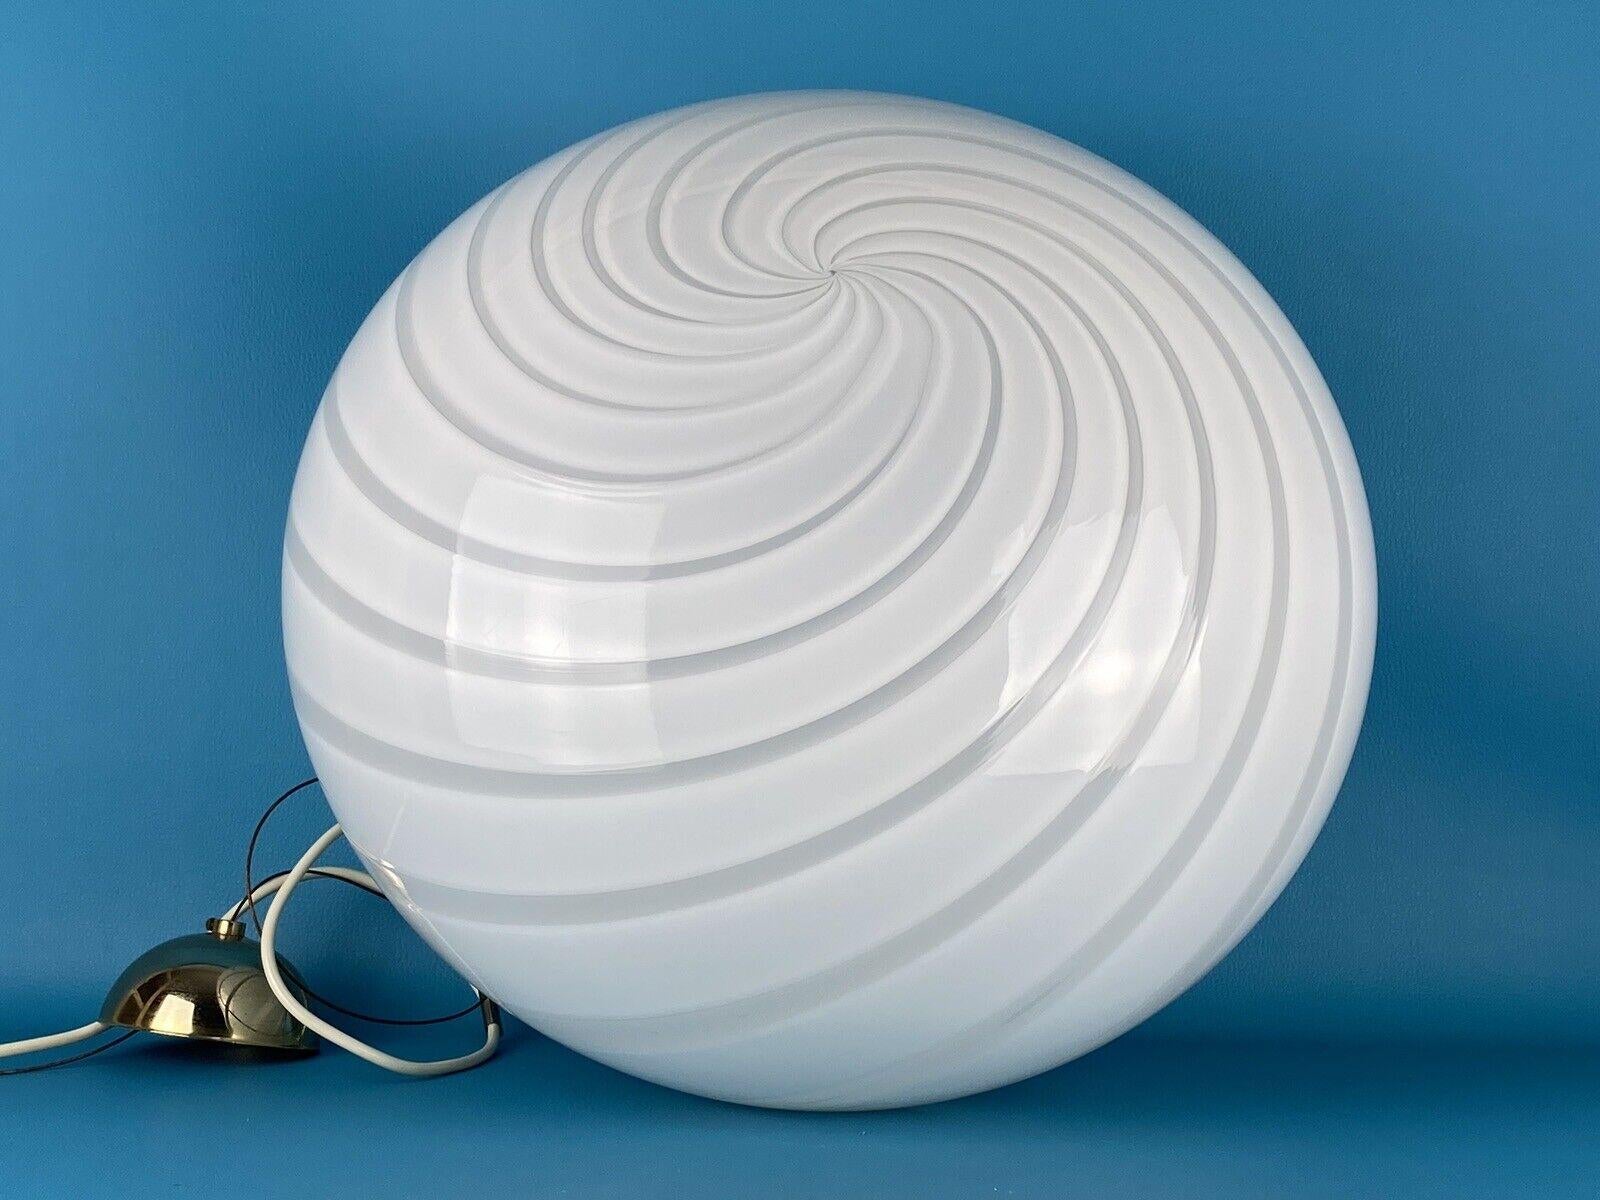 Extra large vintage Murano pendant ceiling lamp in white opaline glass. The glass is hand-blown in an oval shape with a beautiful white swirl pattern. Brass color suspension. Handmade in Italy, 1970s.
D: 45 cm H: 35 cm (glass)

